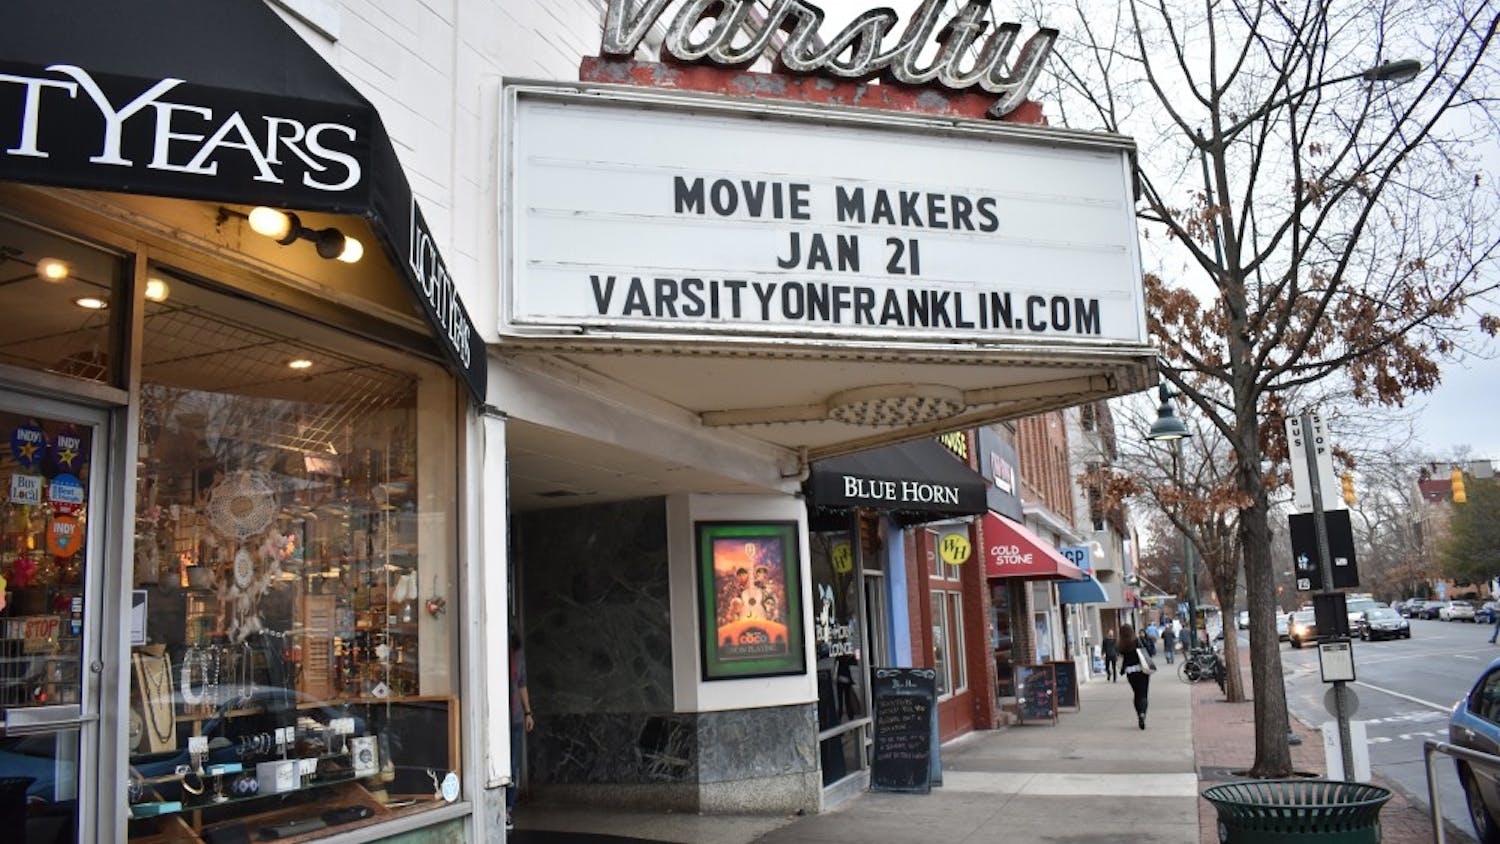 The Varsity Theatre on Franklin St. will be showing new movies this season.